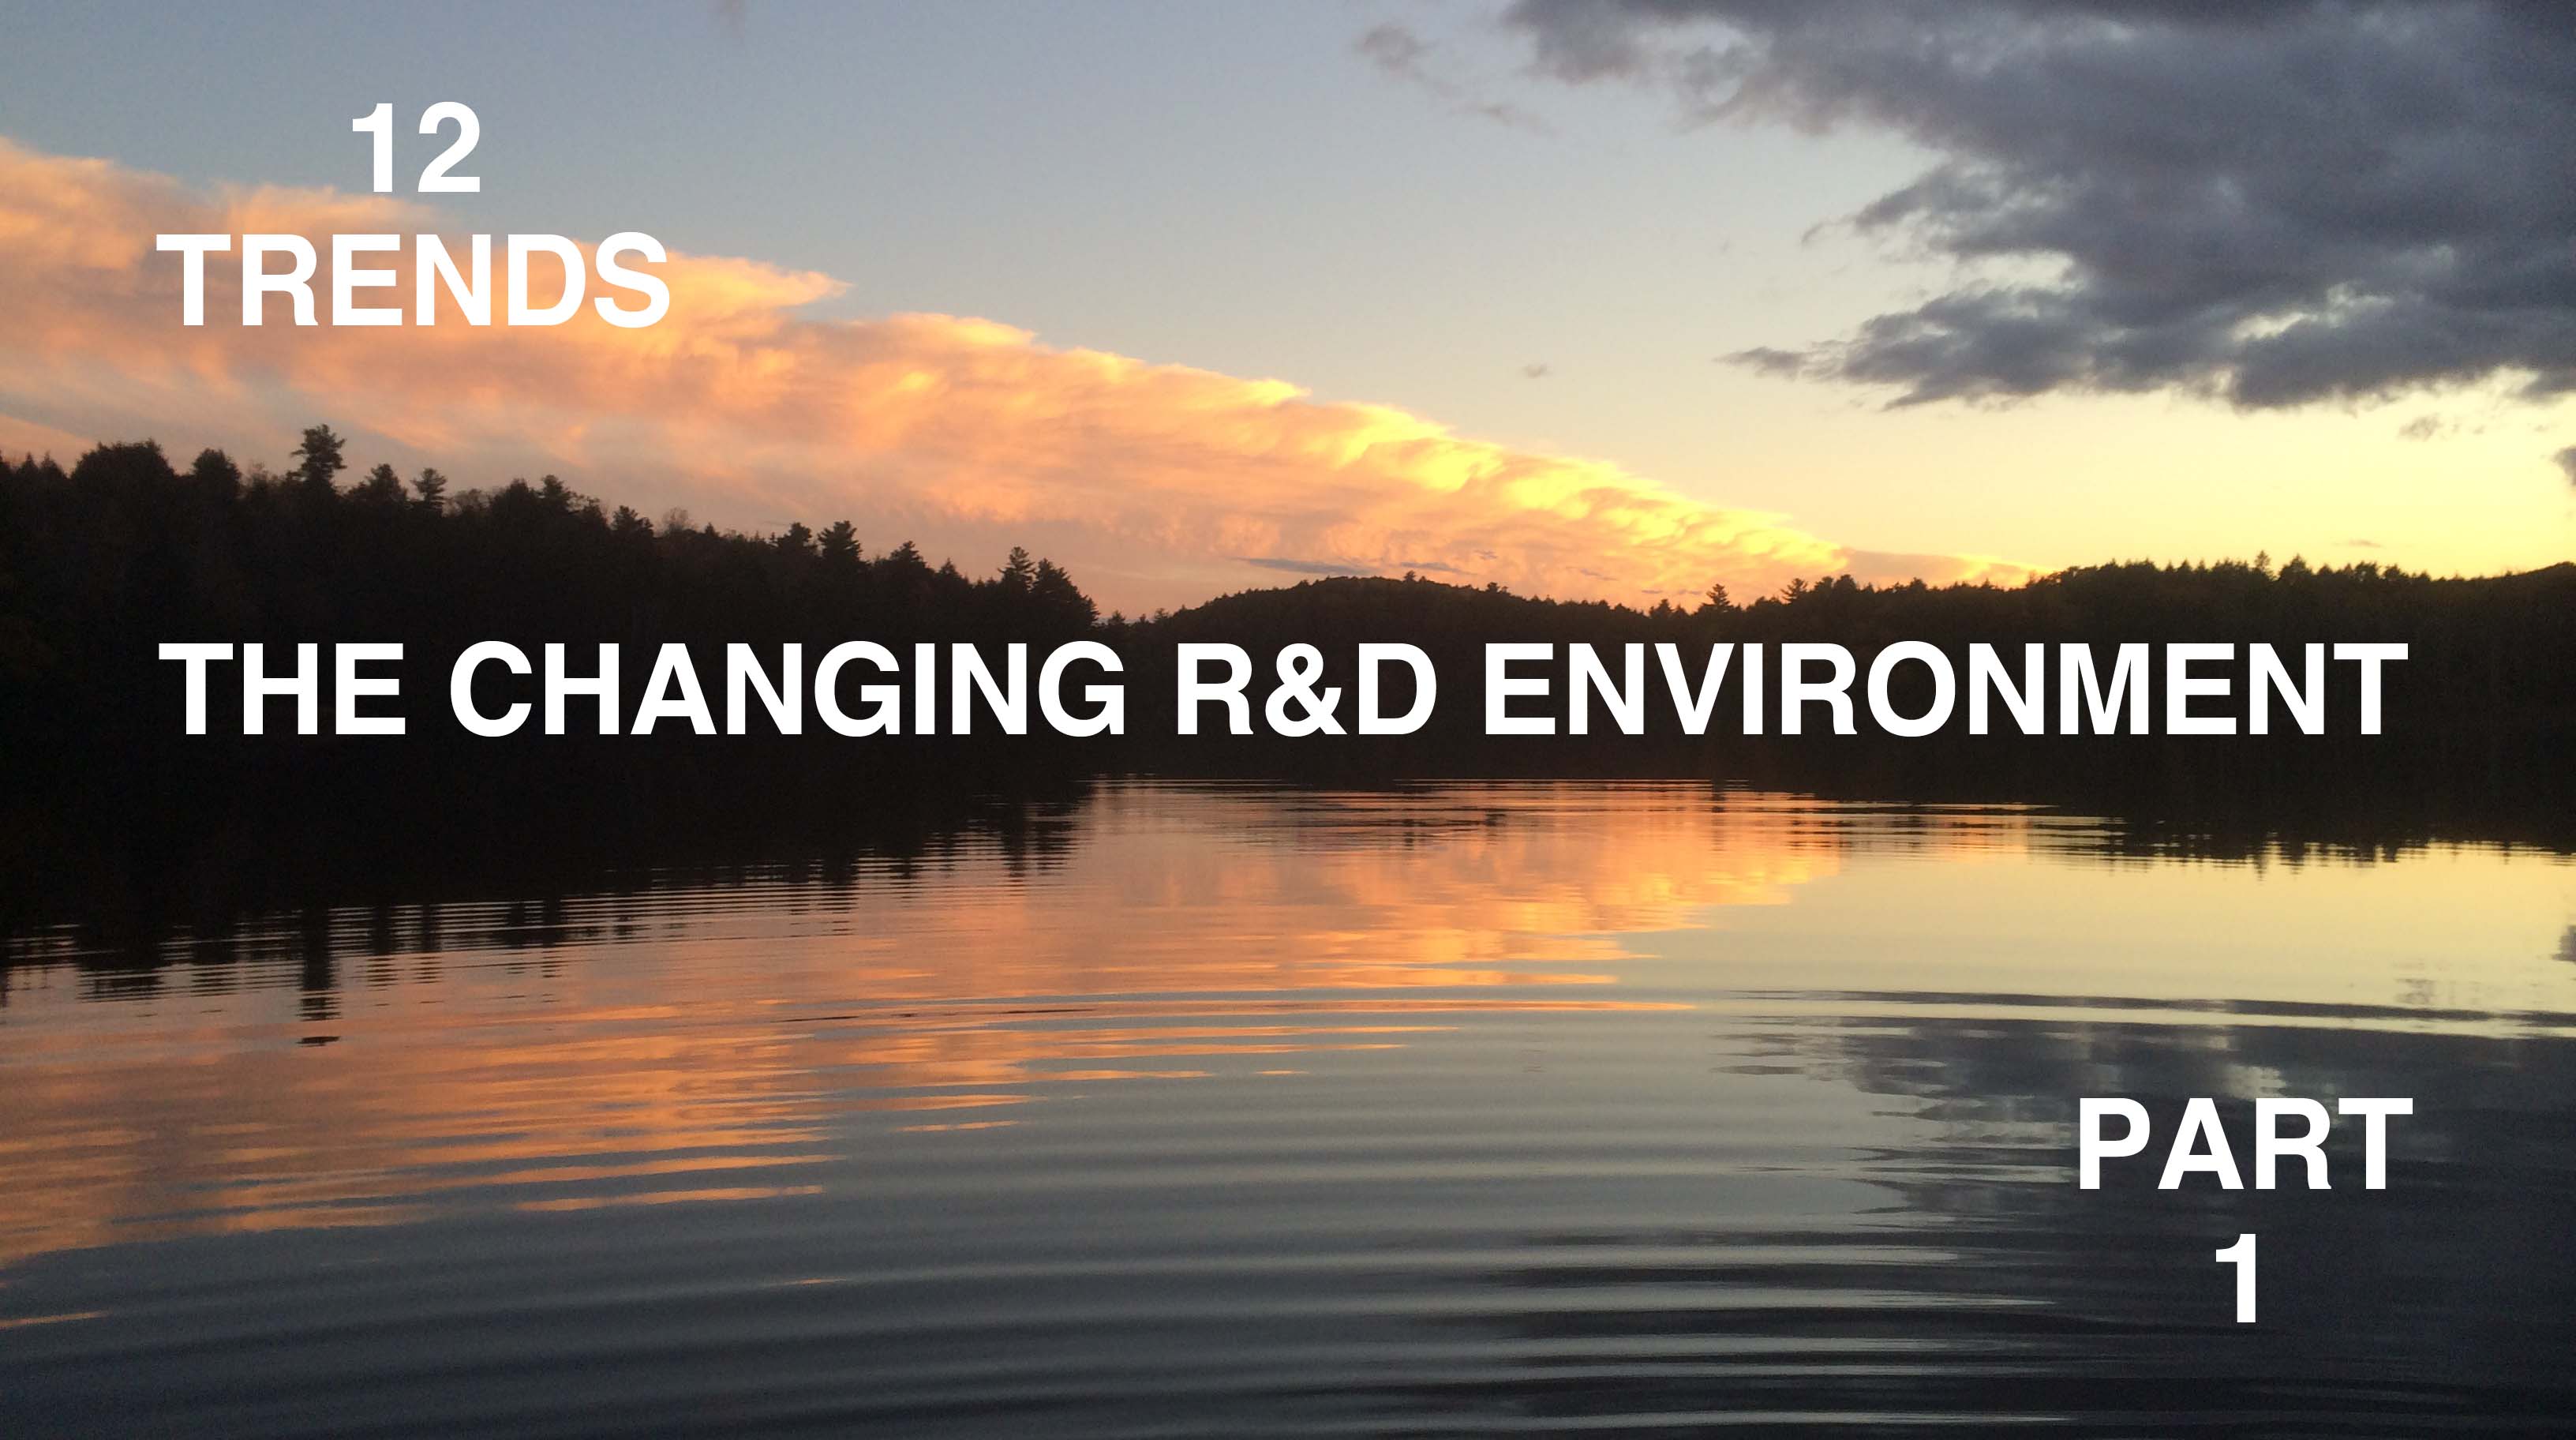 Top 12 Trends in the Science of Managing R&D and Product Development-Part 1